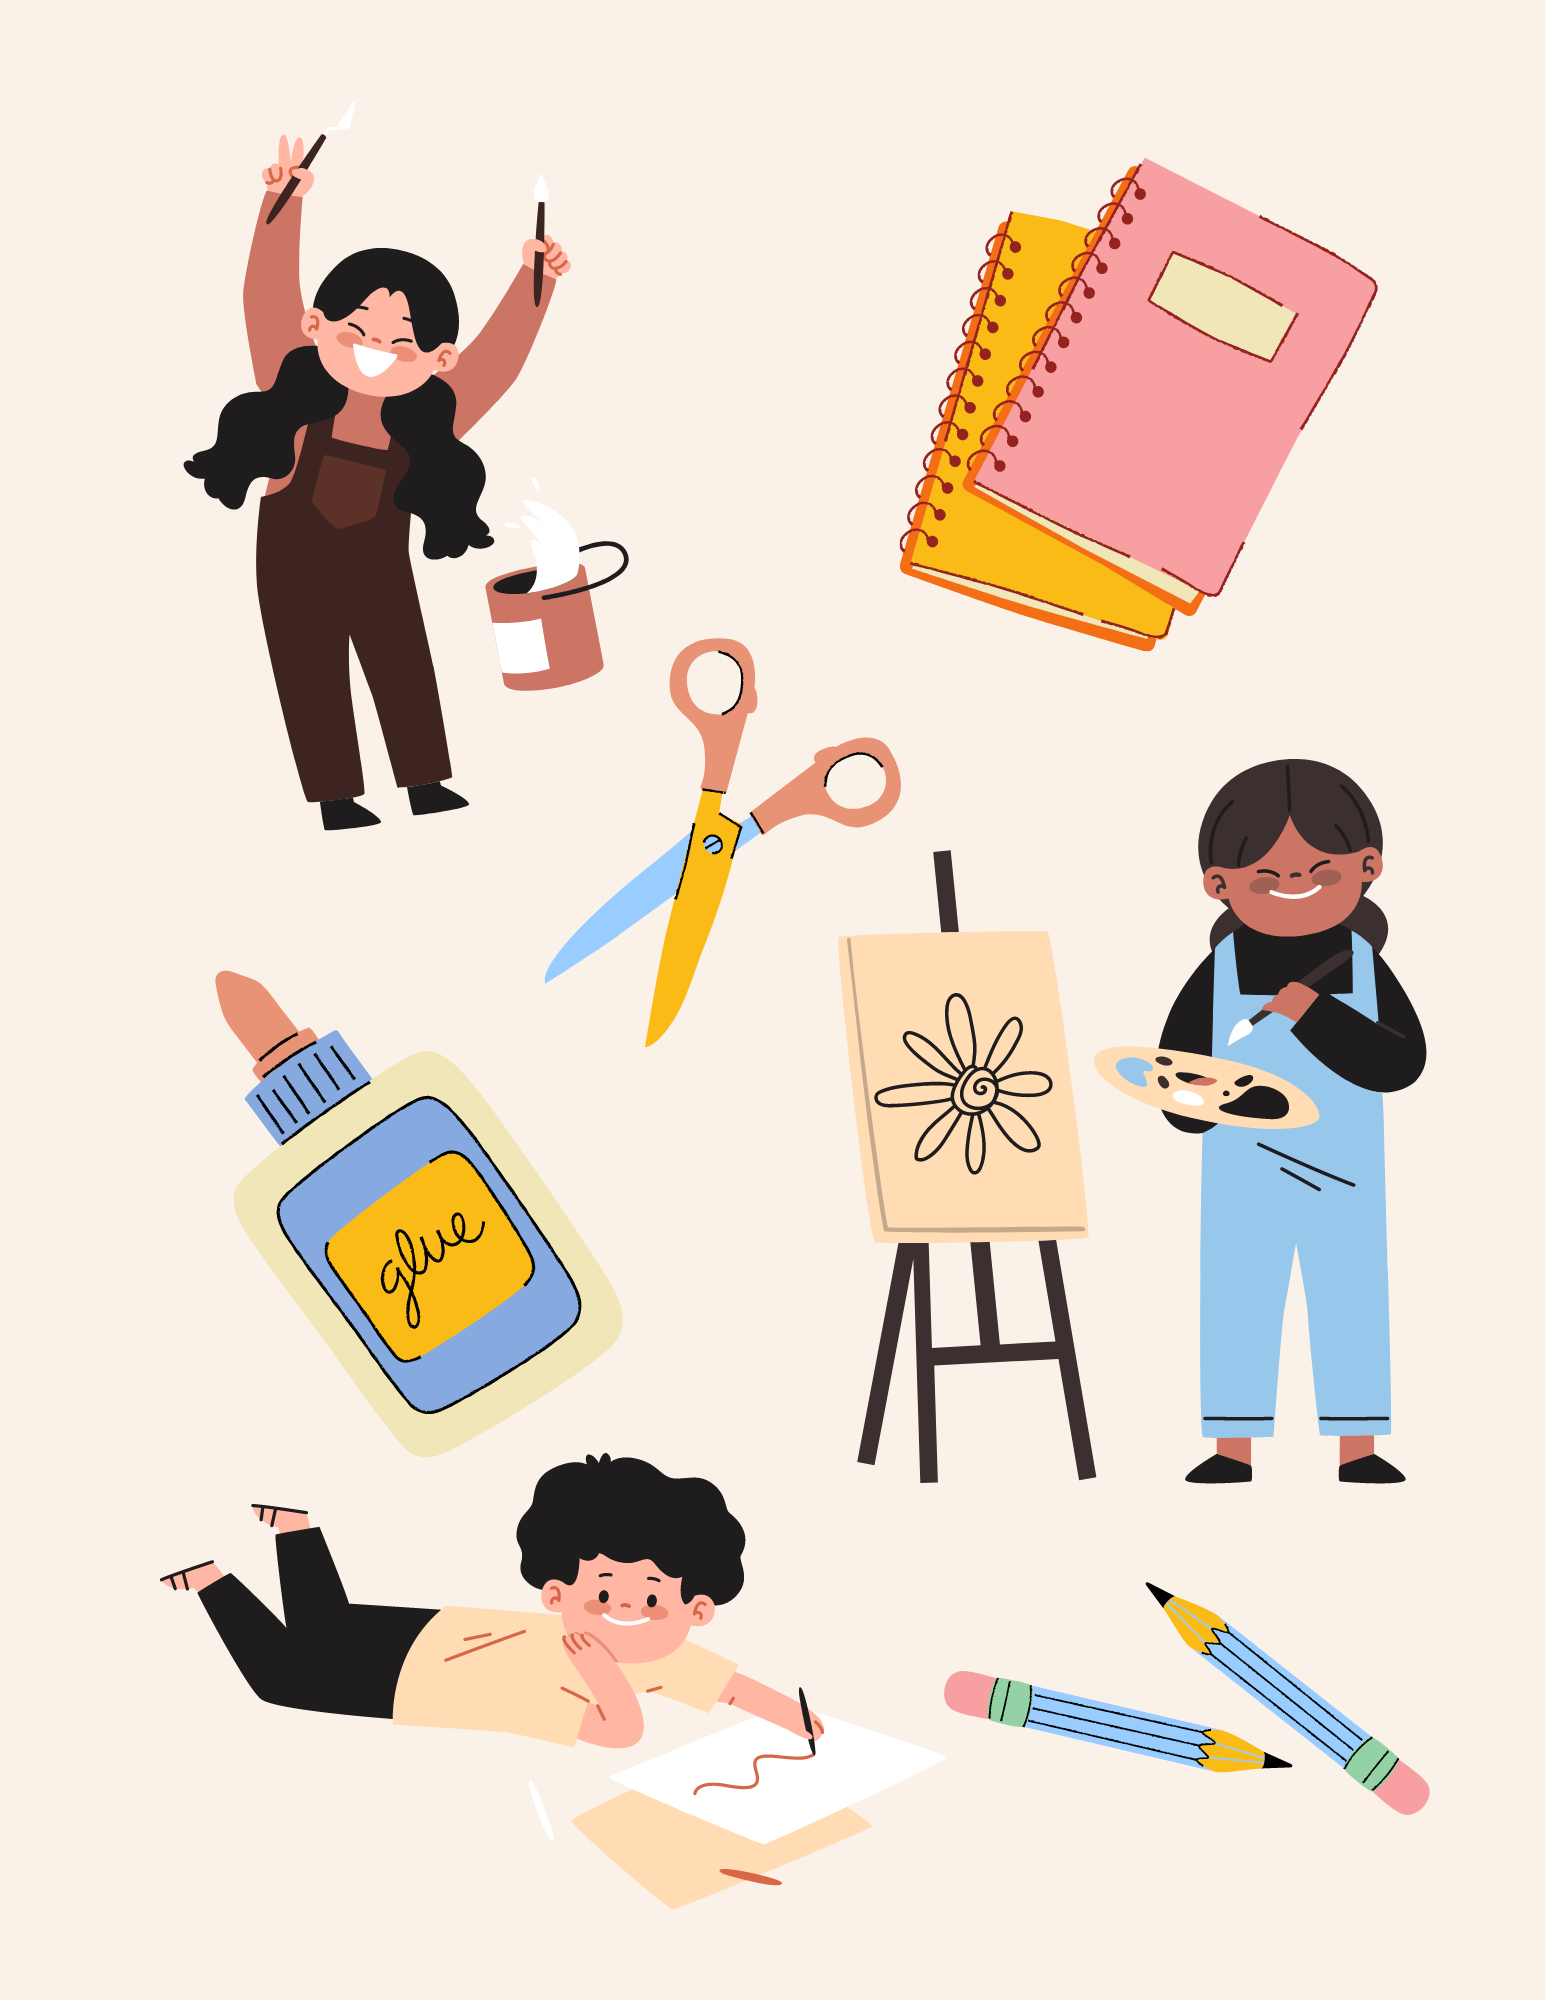 Illustrations of arts and crafts with kids making art. 